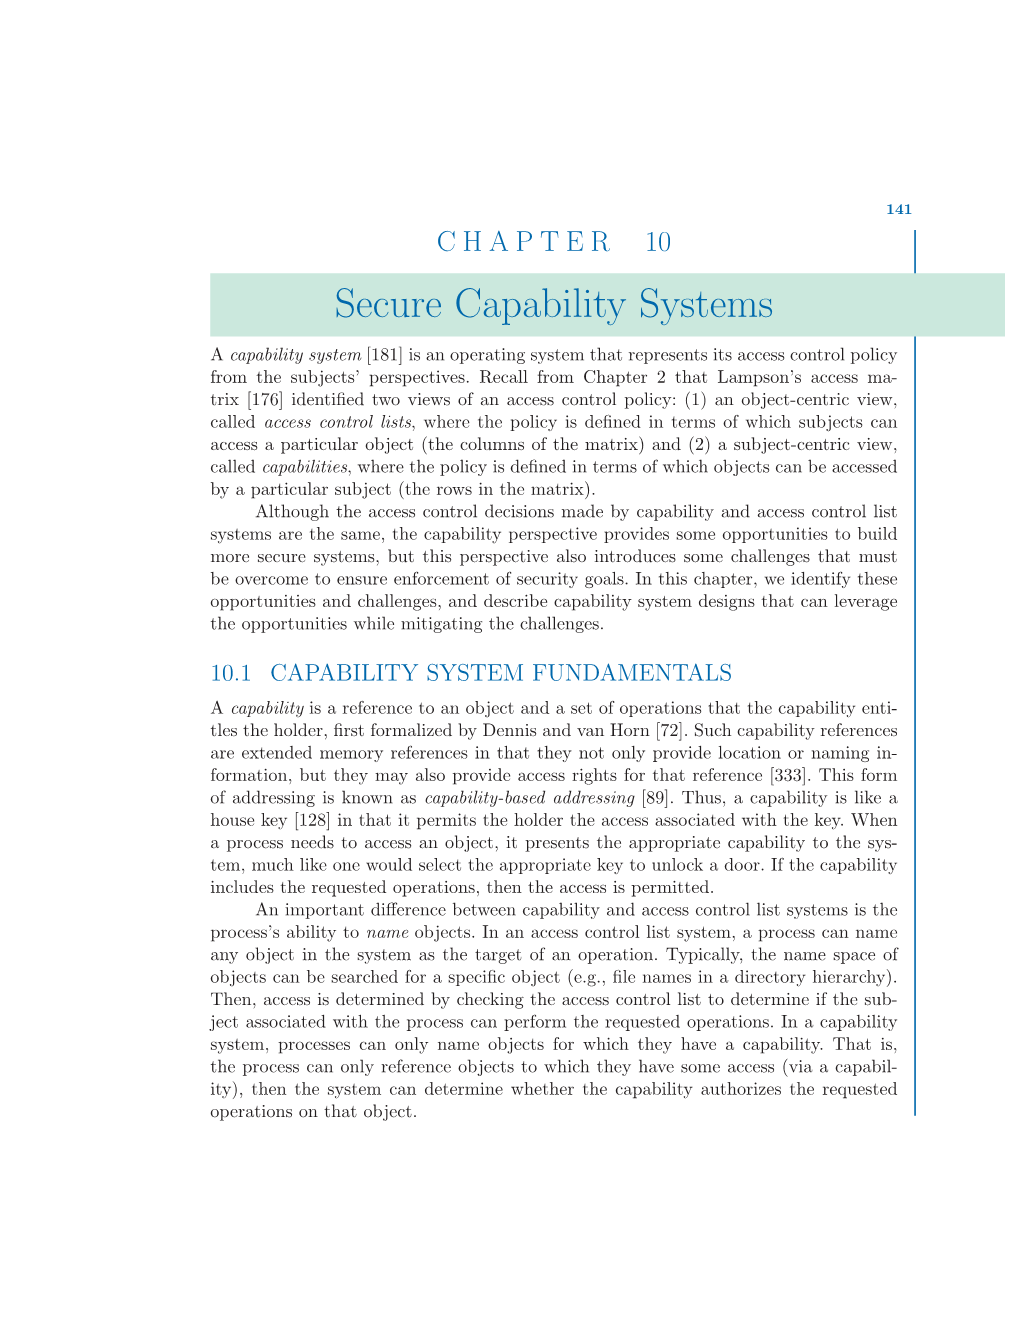 Secure Capability Systems